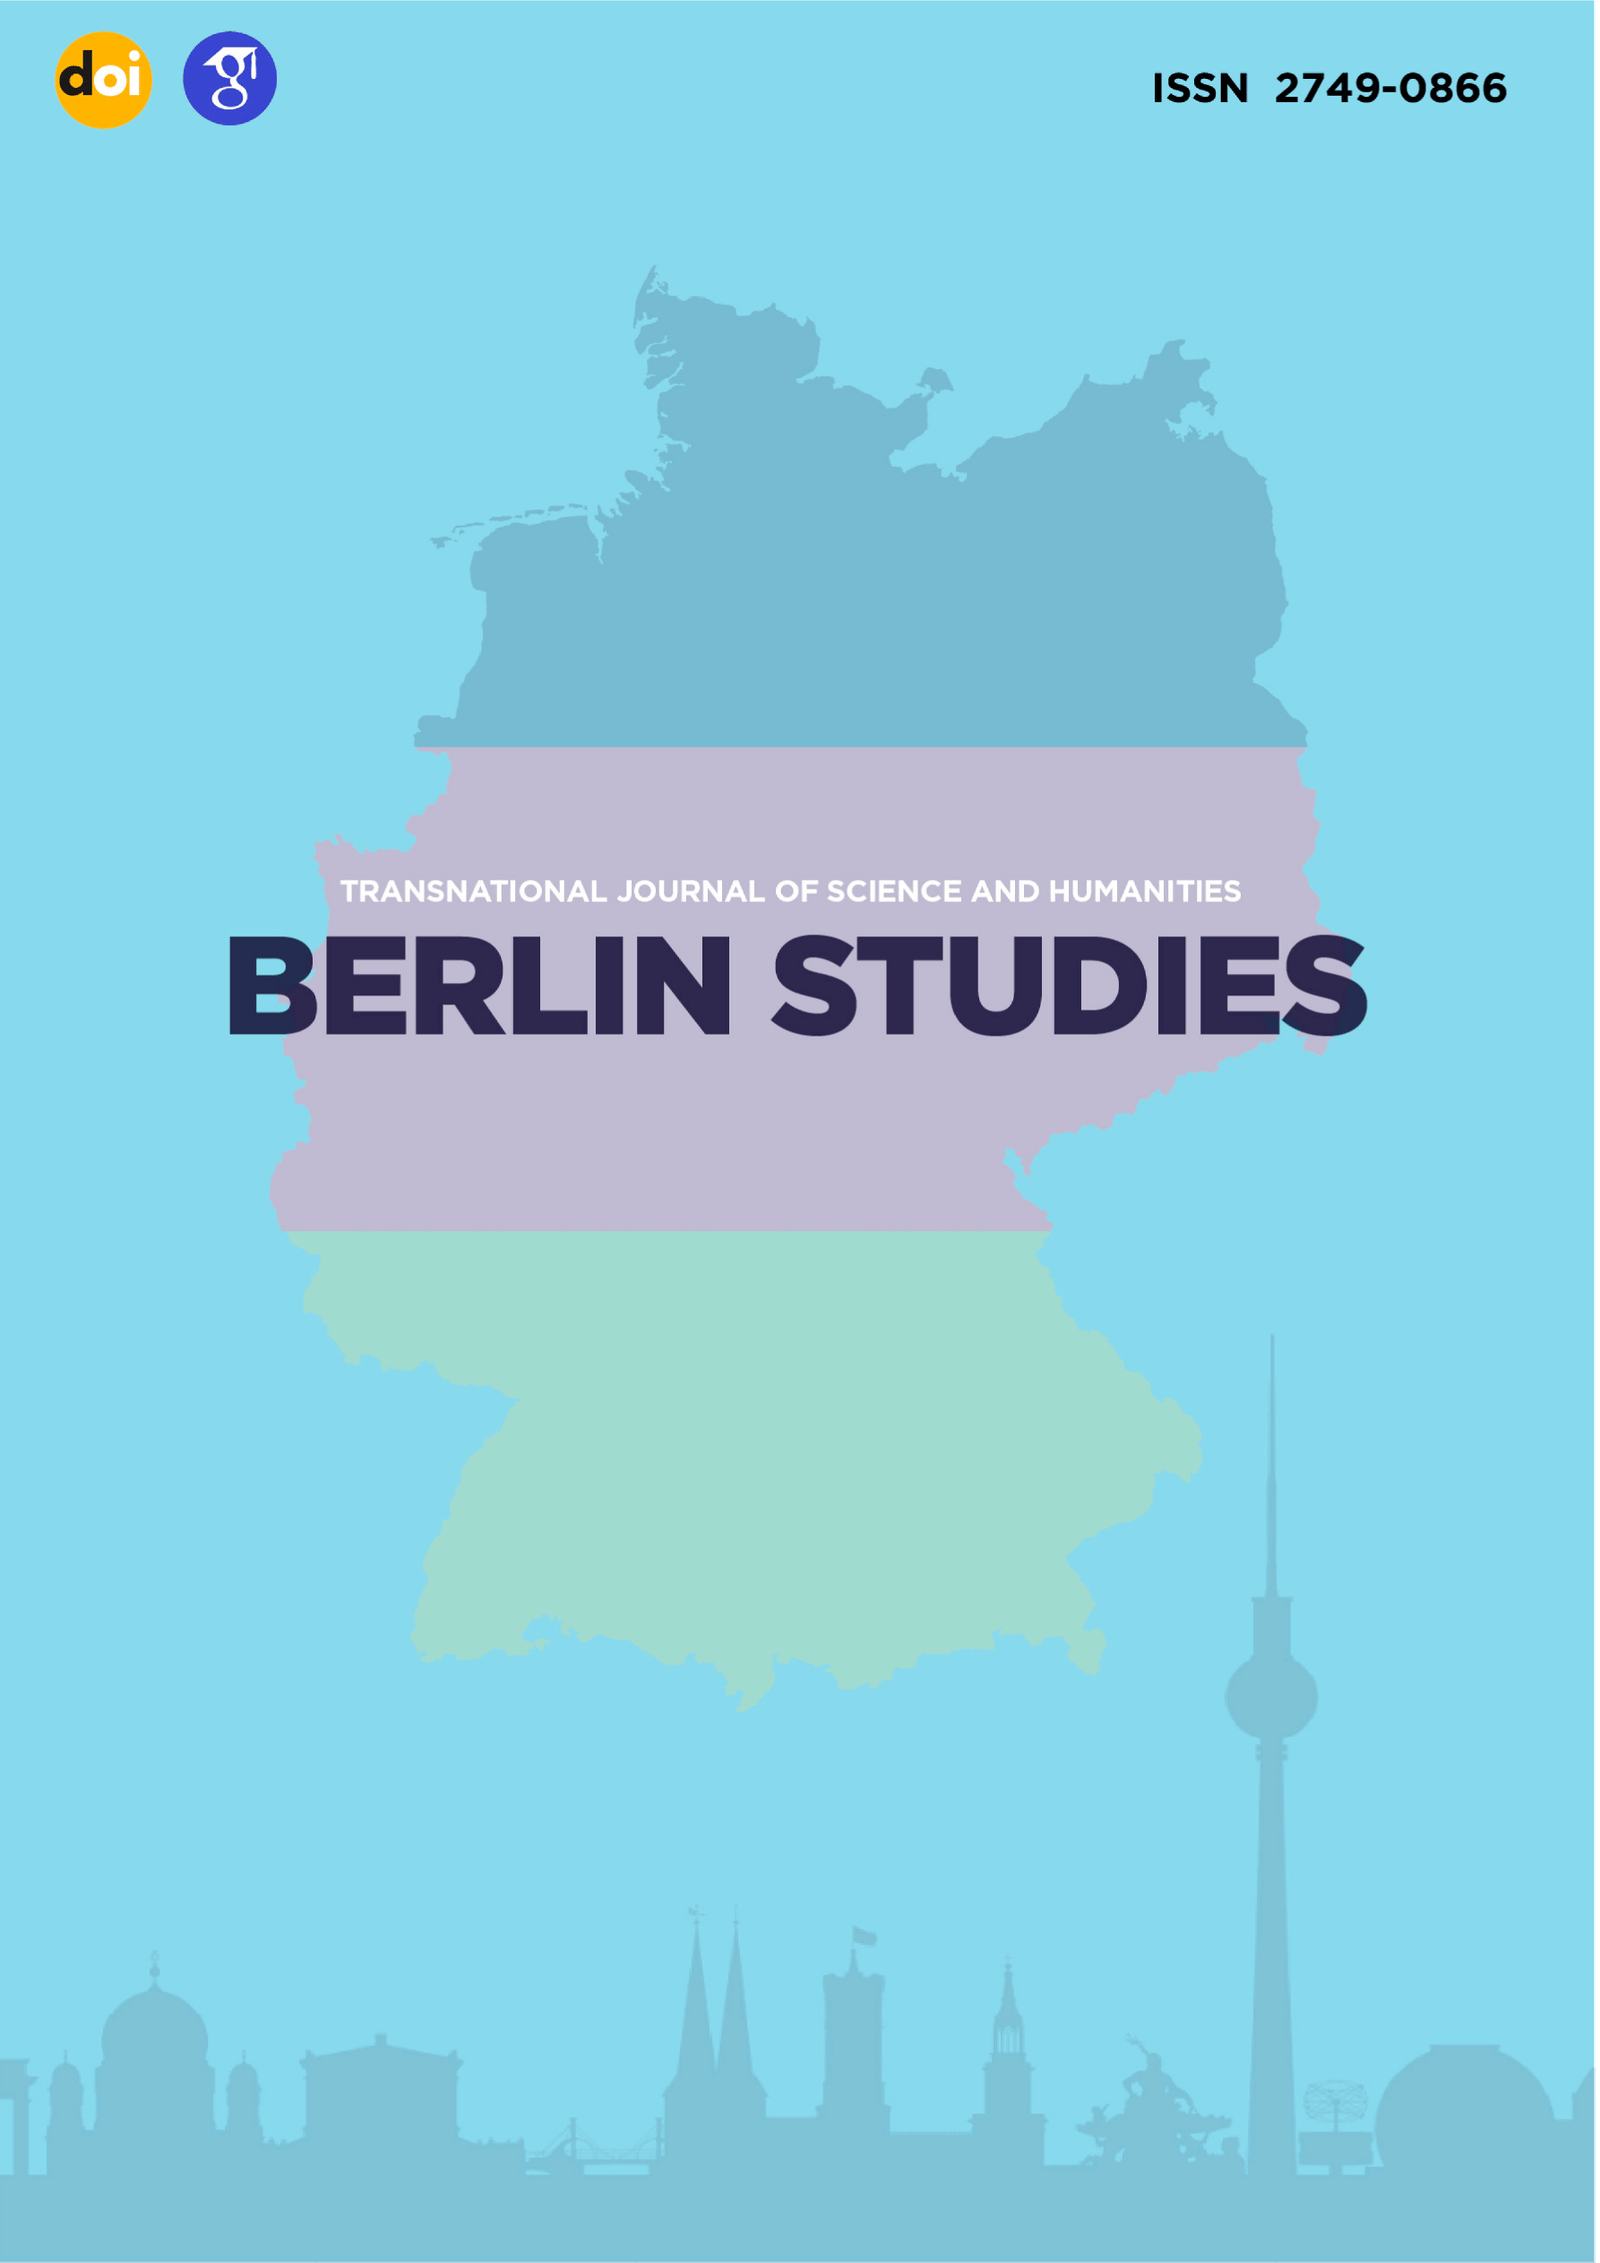 					View Vol. 2 No. 1.8 Political sciences (2022): Berlin Studies Transnational Journal of Science and Humanities
				